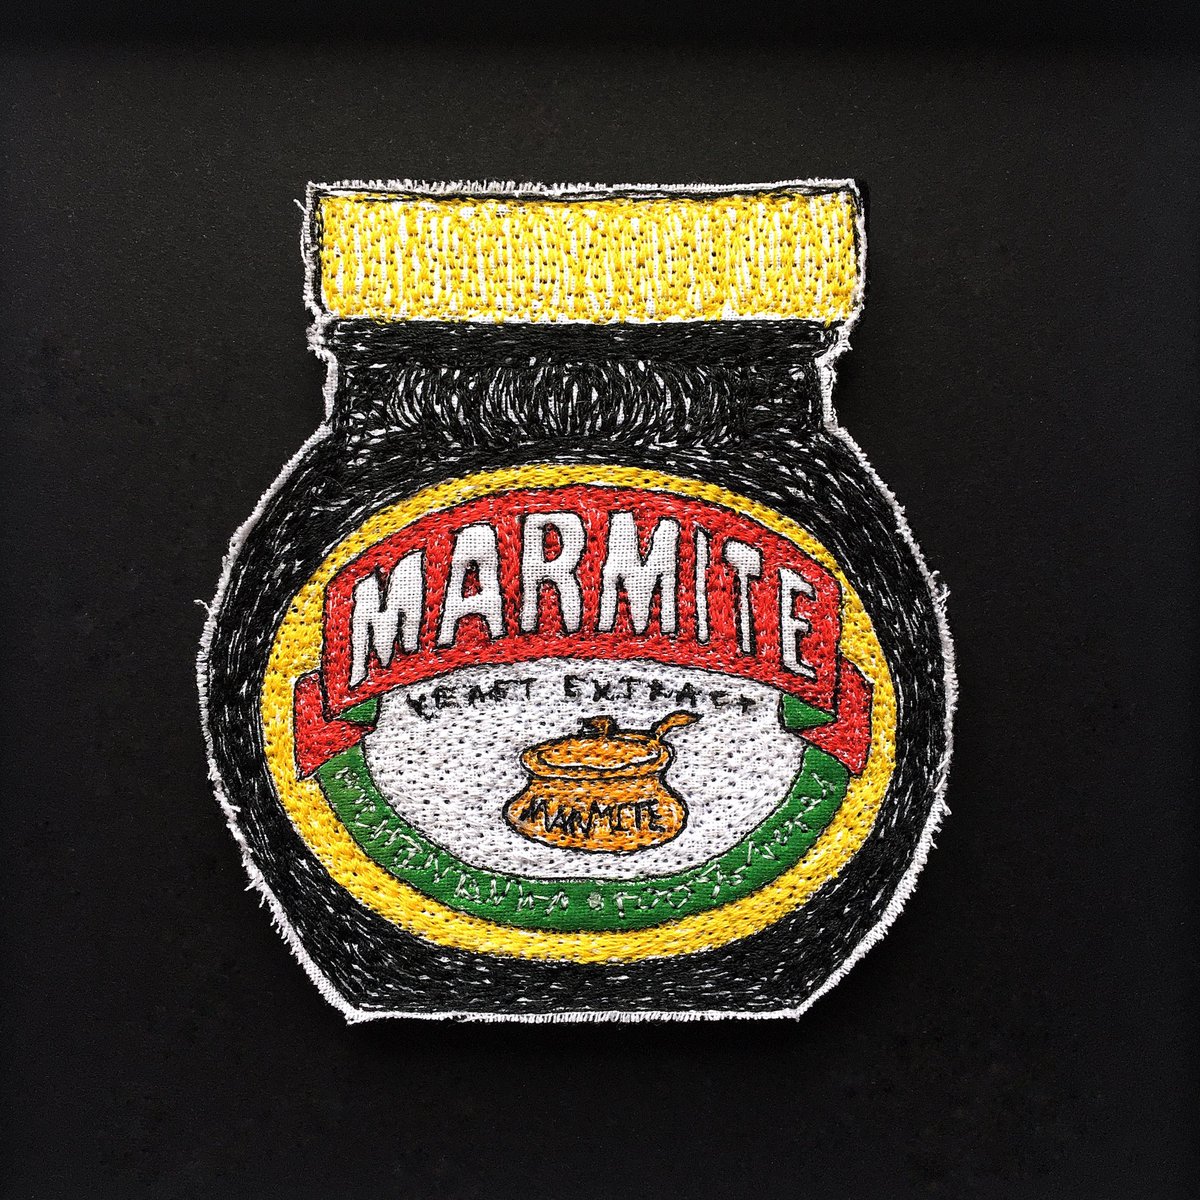 New tub of Marmite in the shop! 👁🖤👁